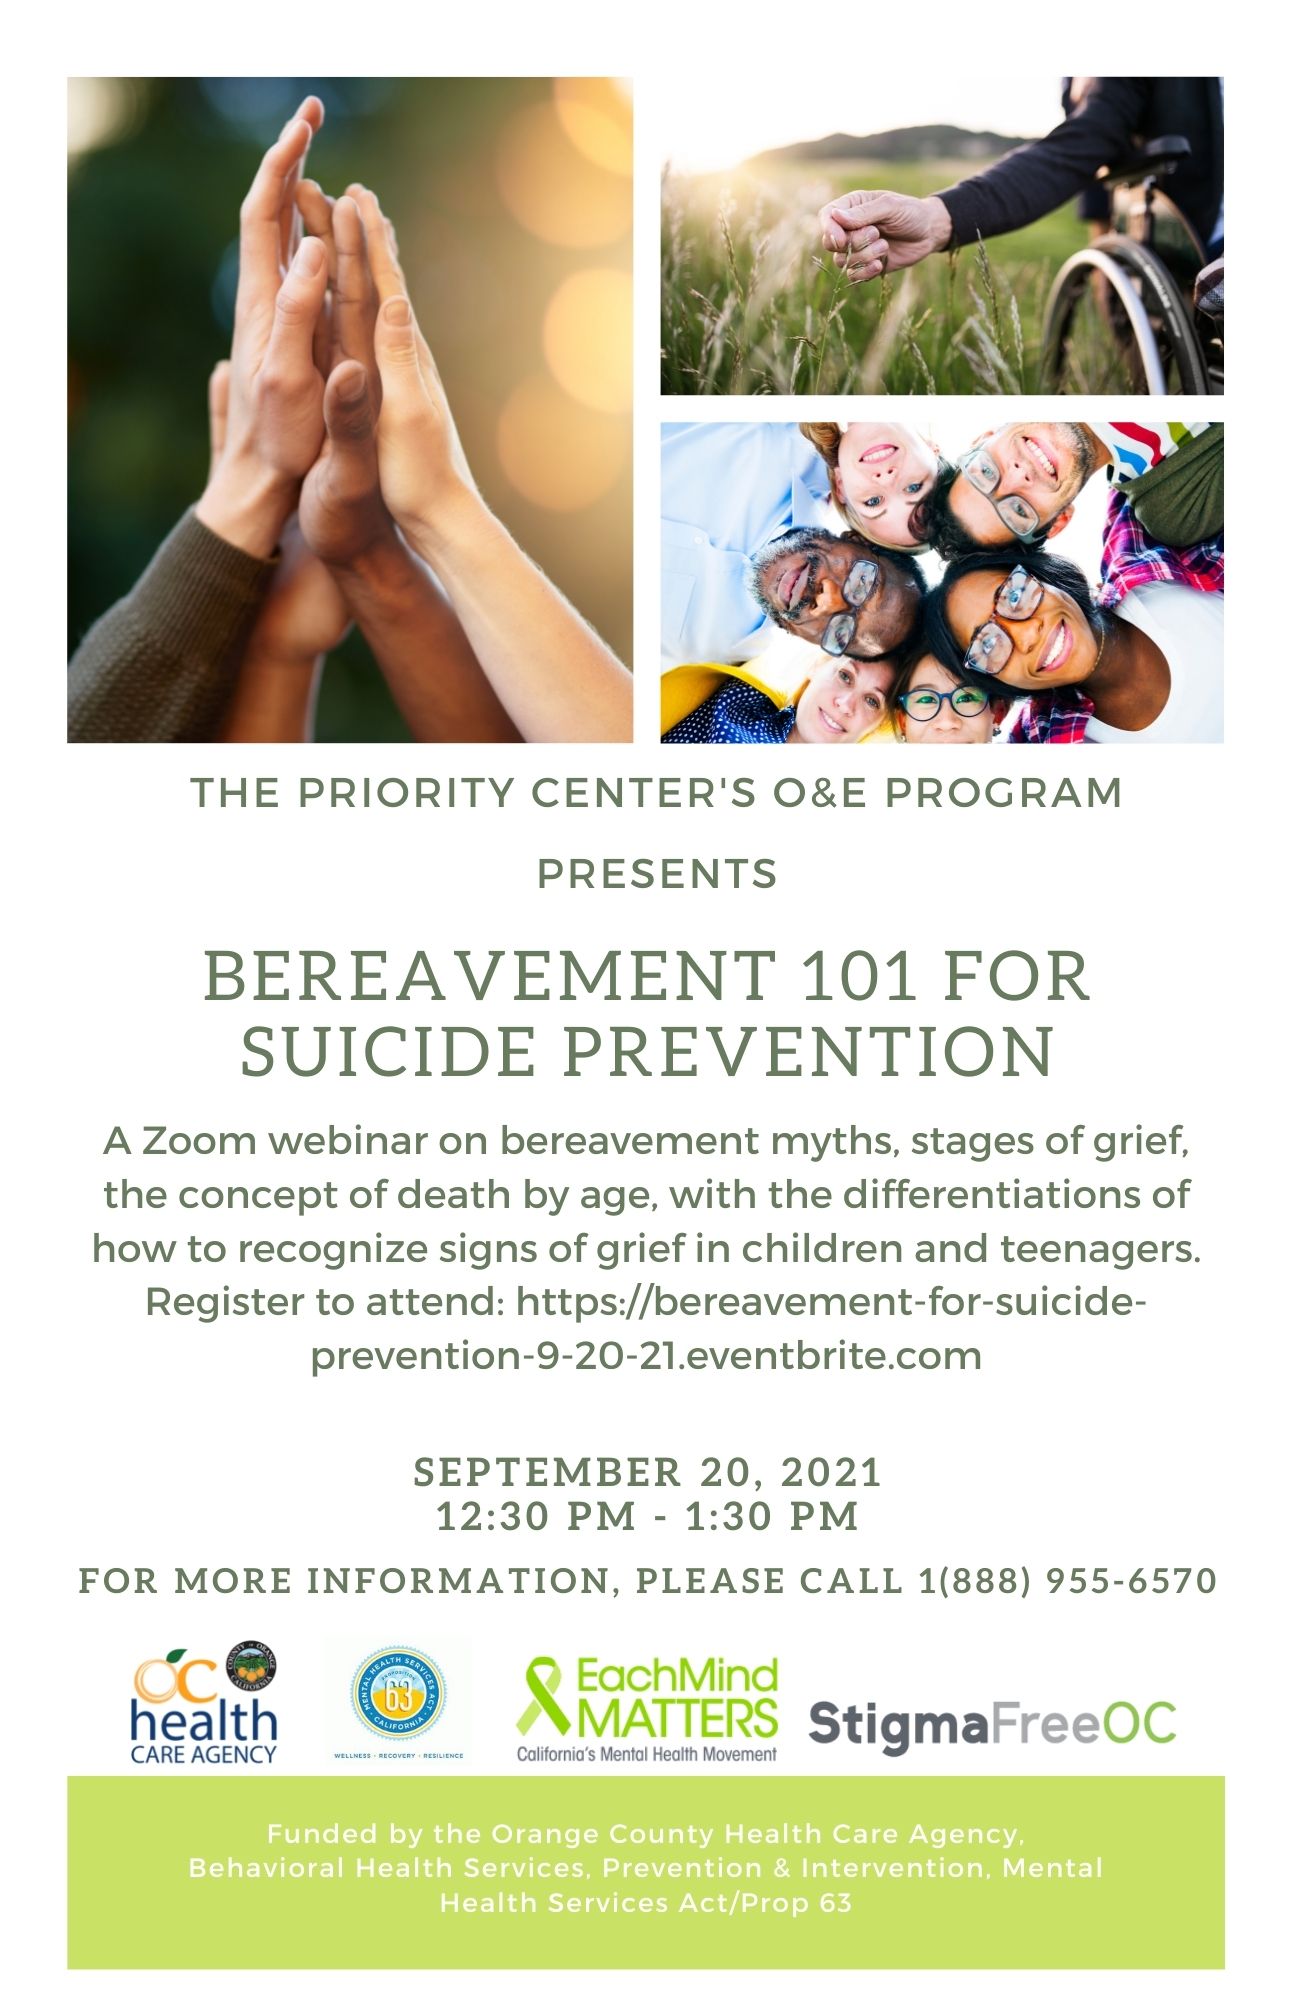 The Priority Center presents: Bereavement 101 for Suicide Prevention